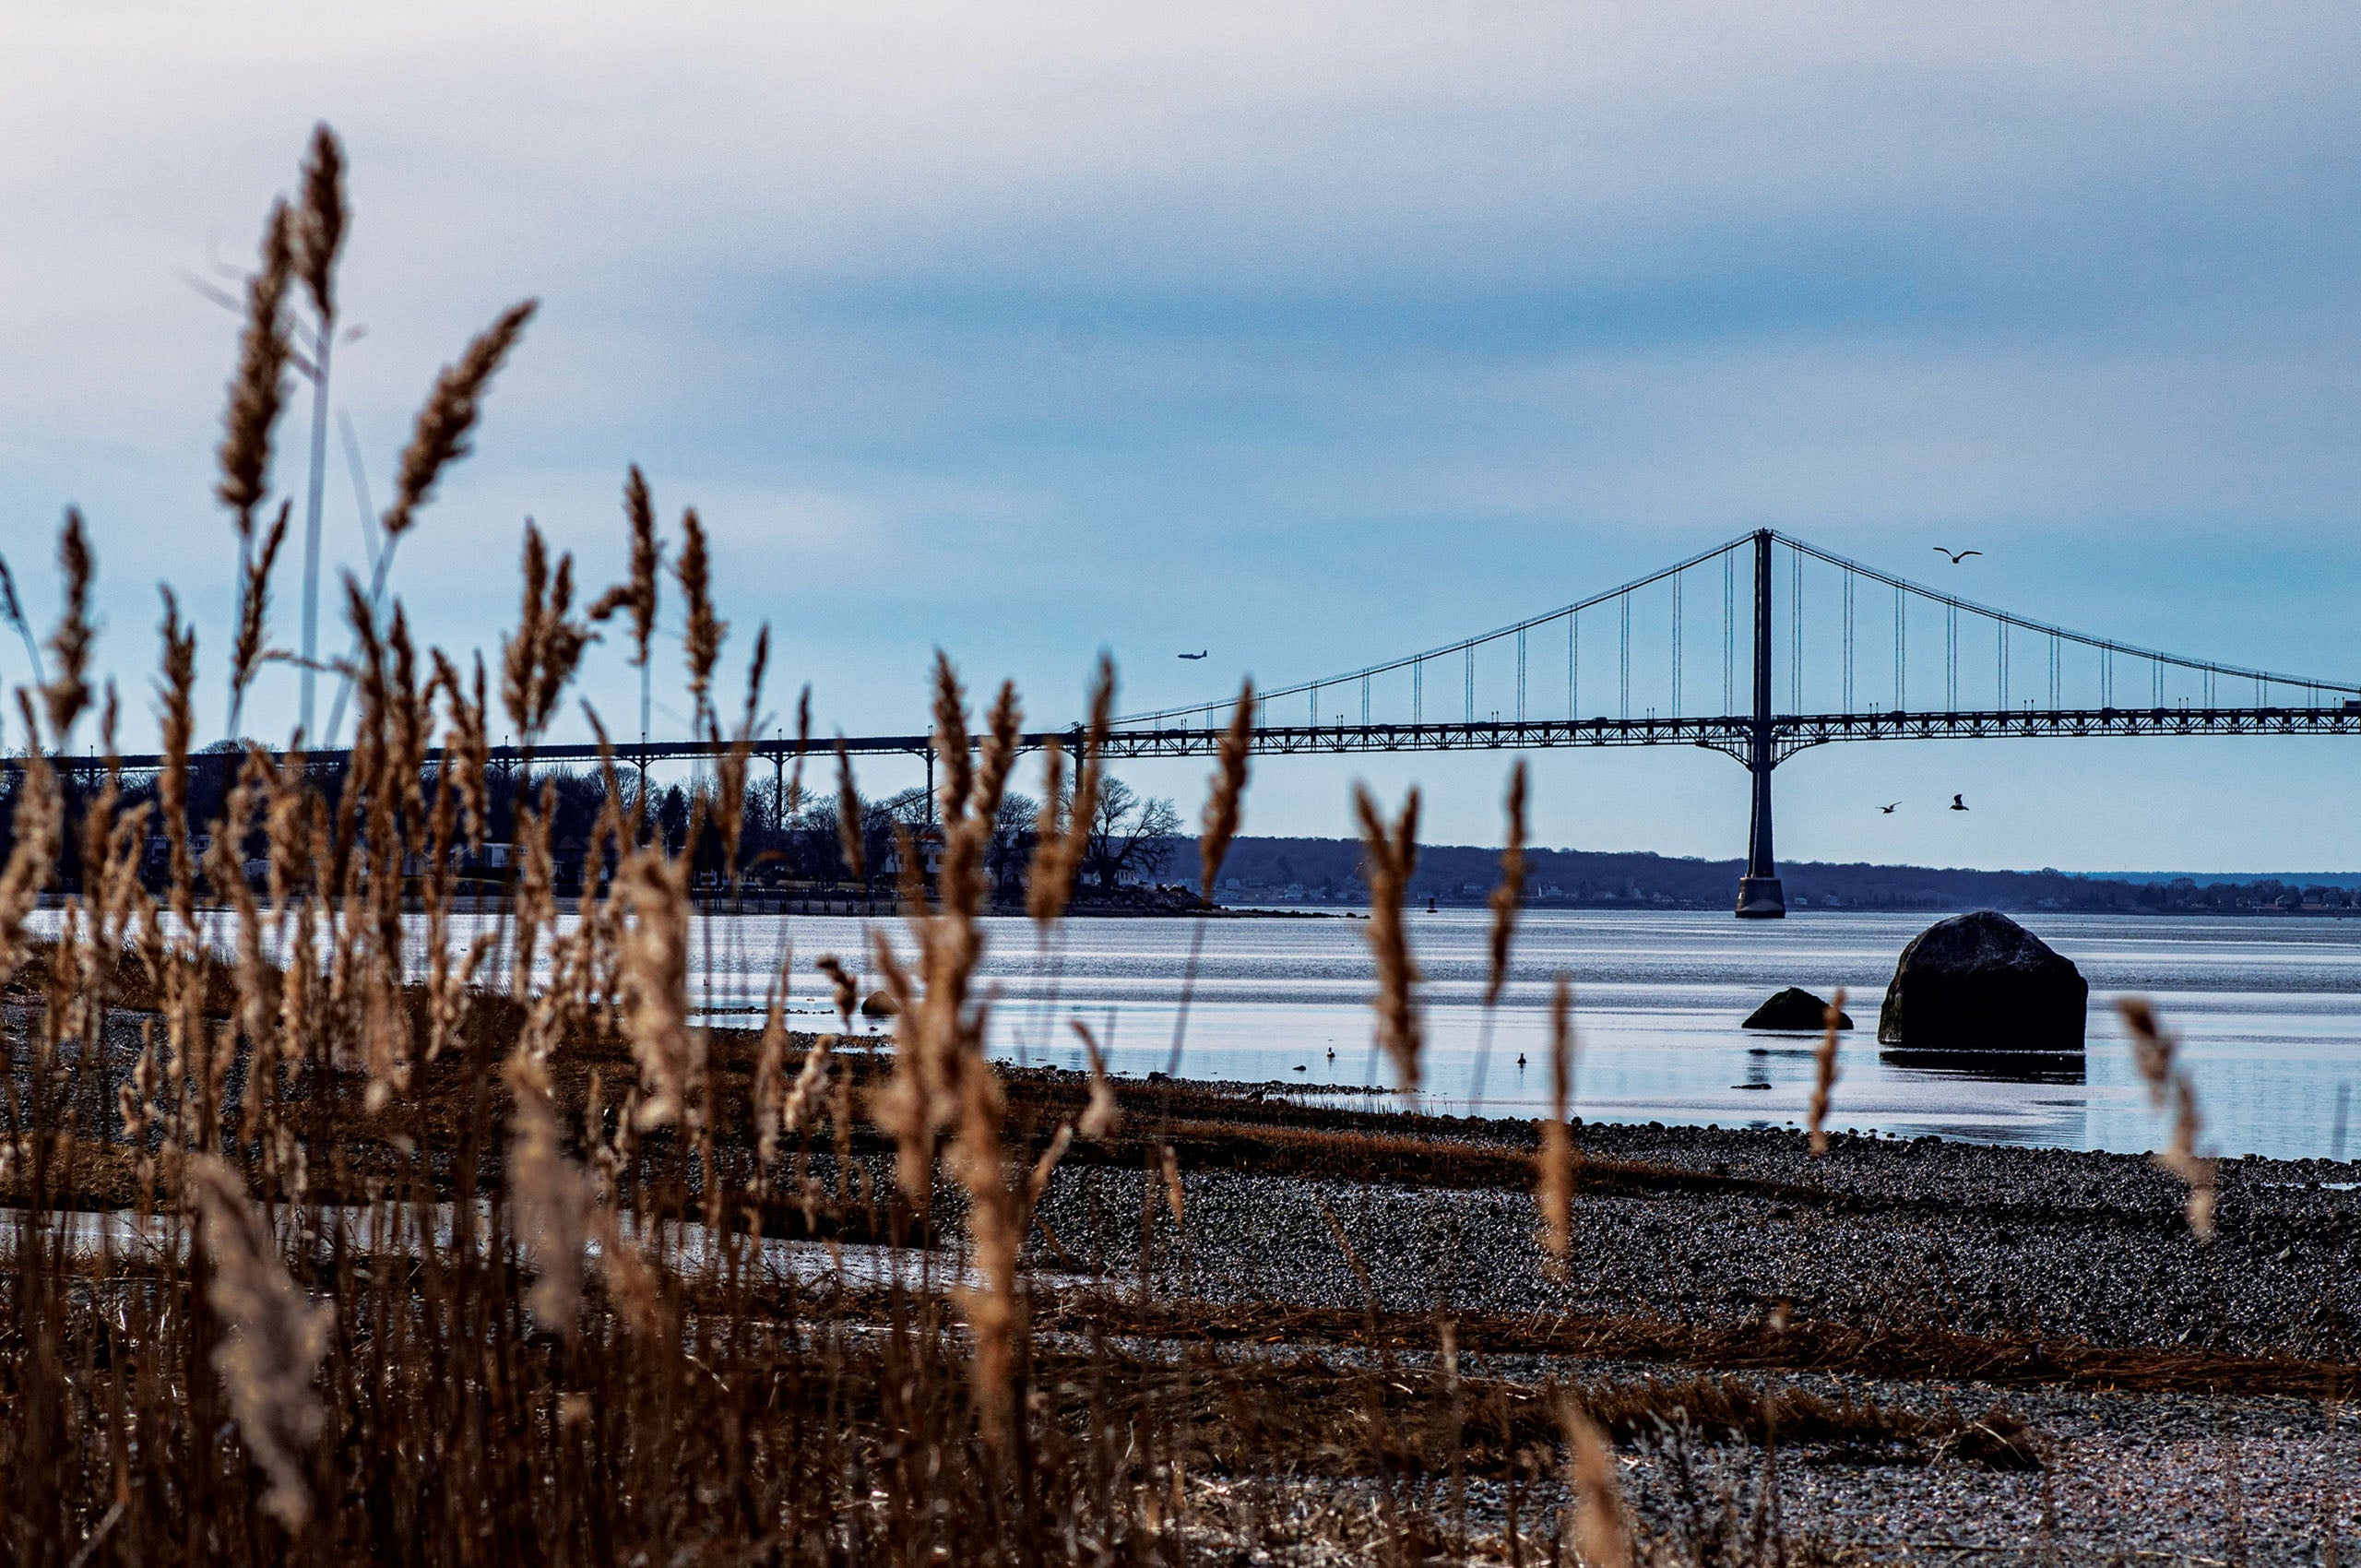 The Mount Hope Bridge seen from Portsmouth, RI